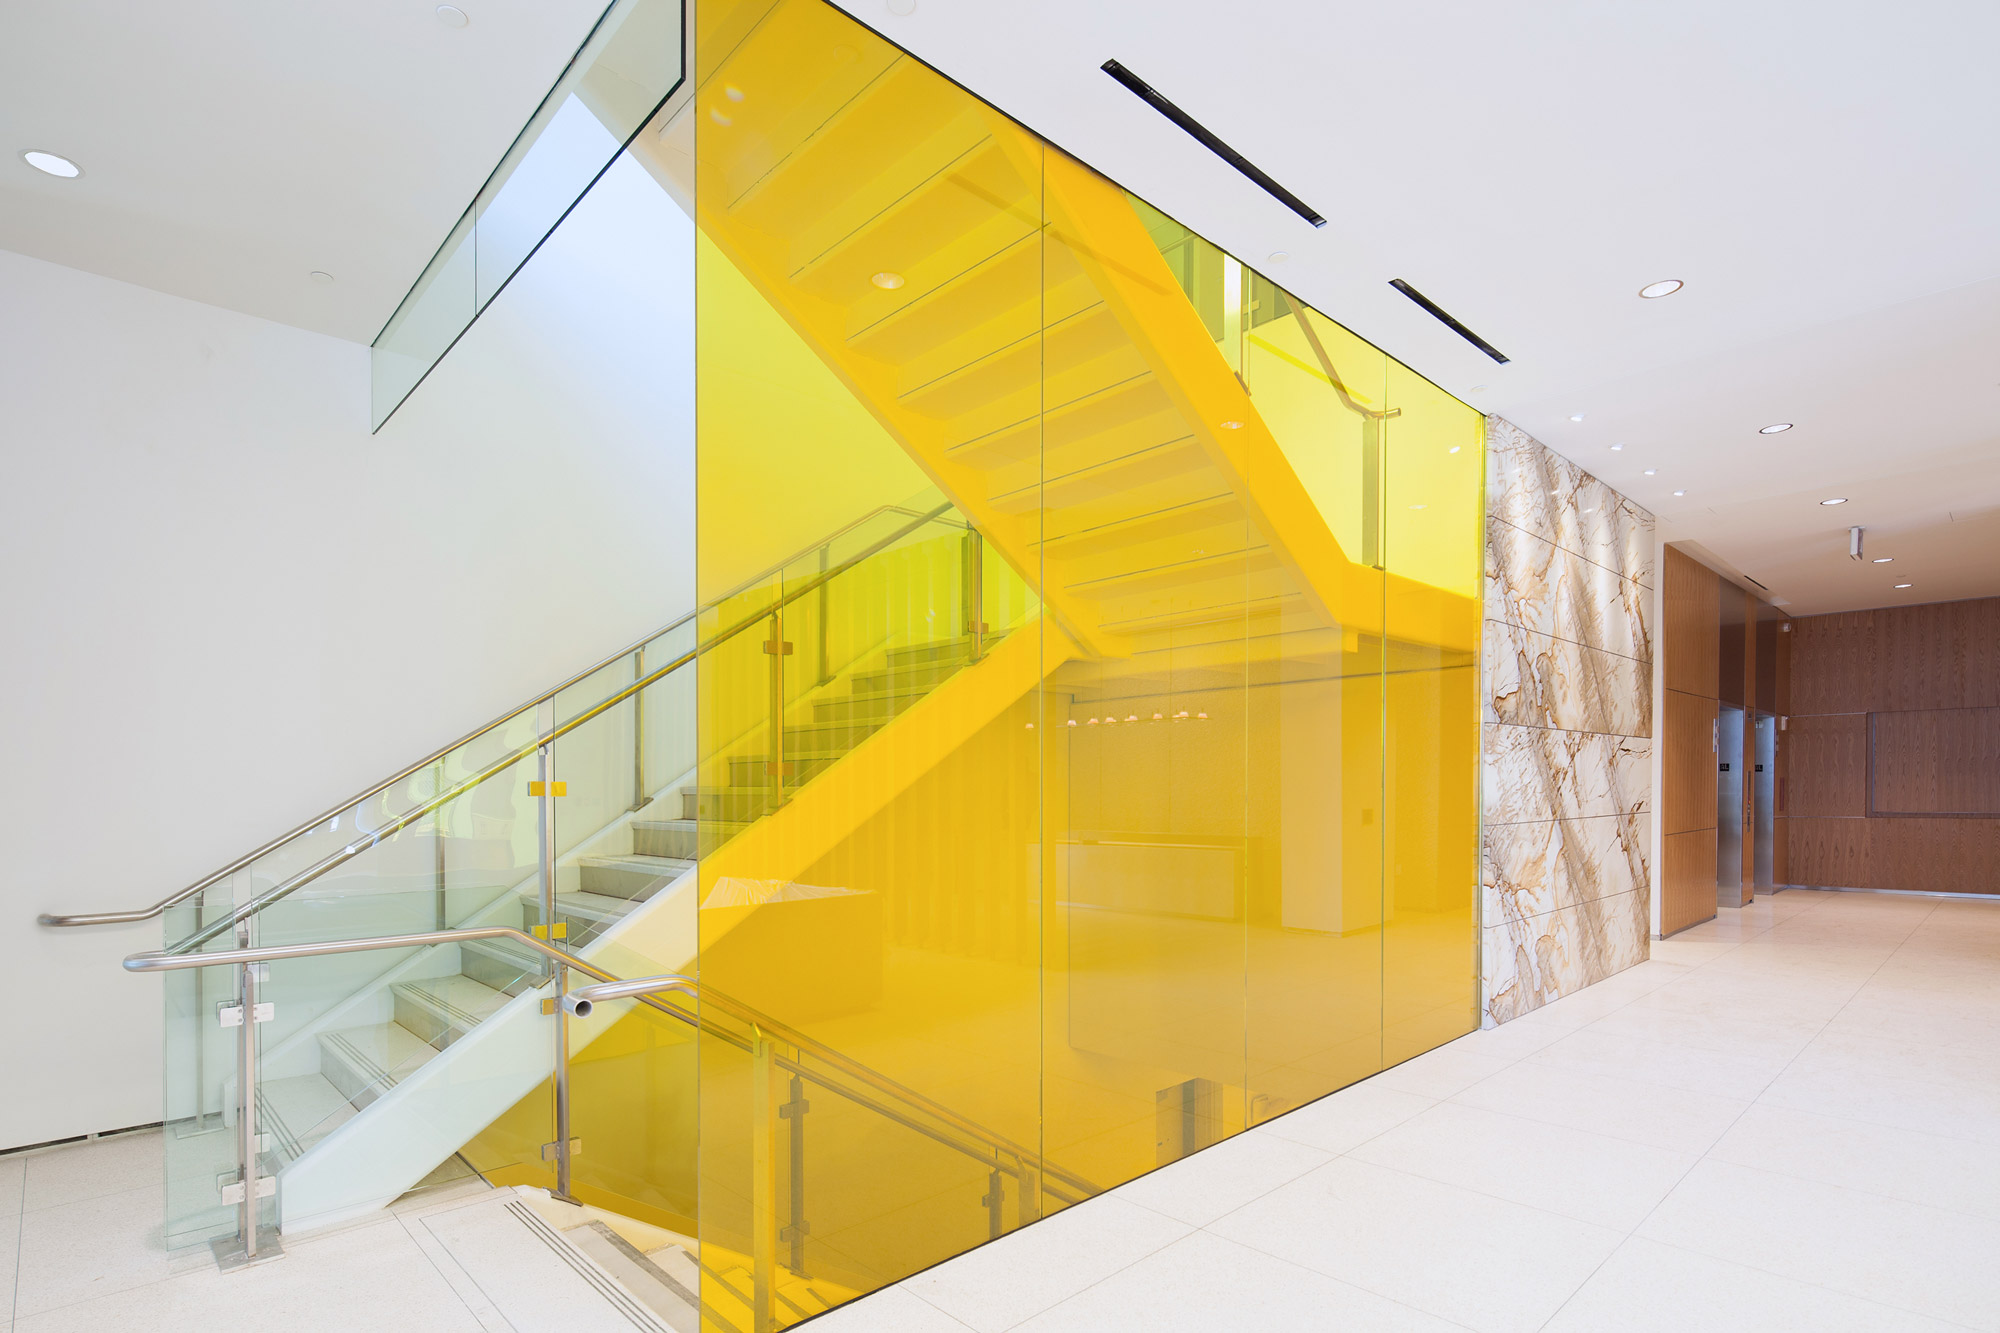 Pantone’s 2021 Color of the Year, Illuminating, is captured with architectural glass manufactured by Bendheim in the City Market at O Street project in Washington, D.C. Photo by Dorian Shy, Framework Photographic.